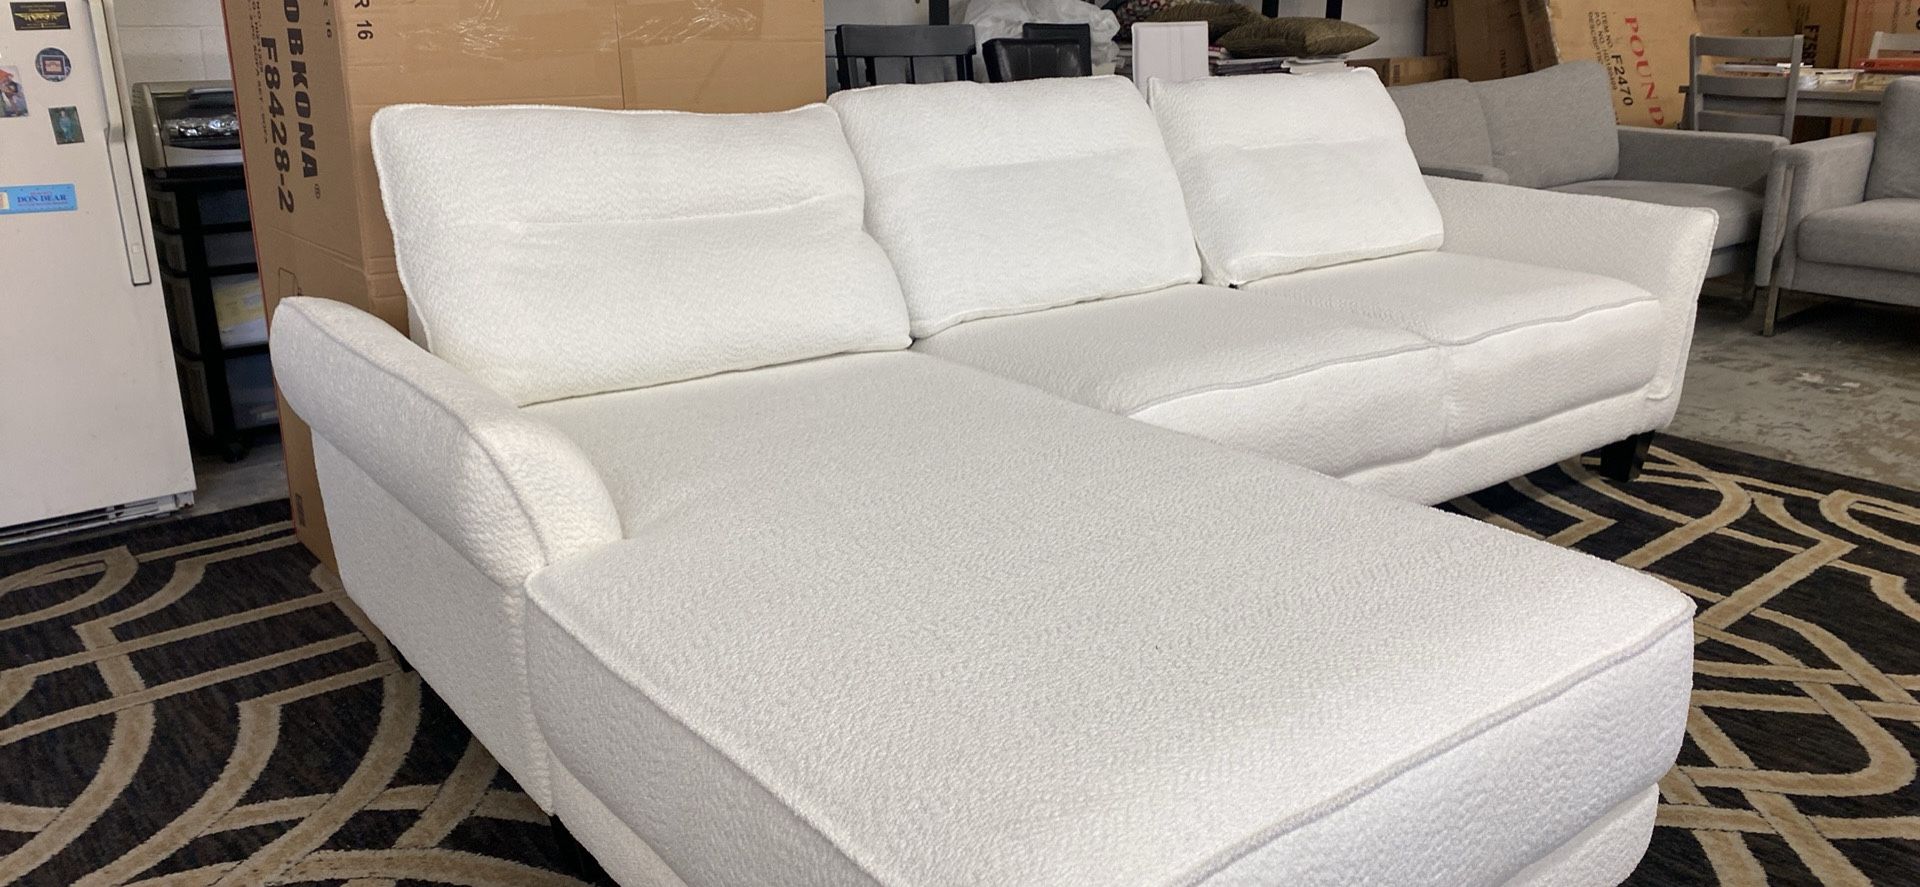 New Luxury Fabric Sectional Couch / Free Delivery 